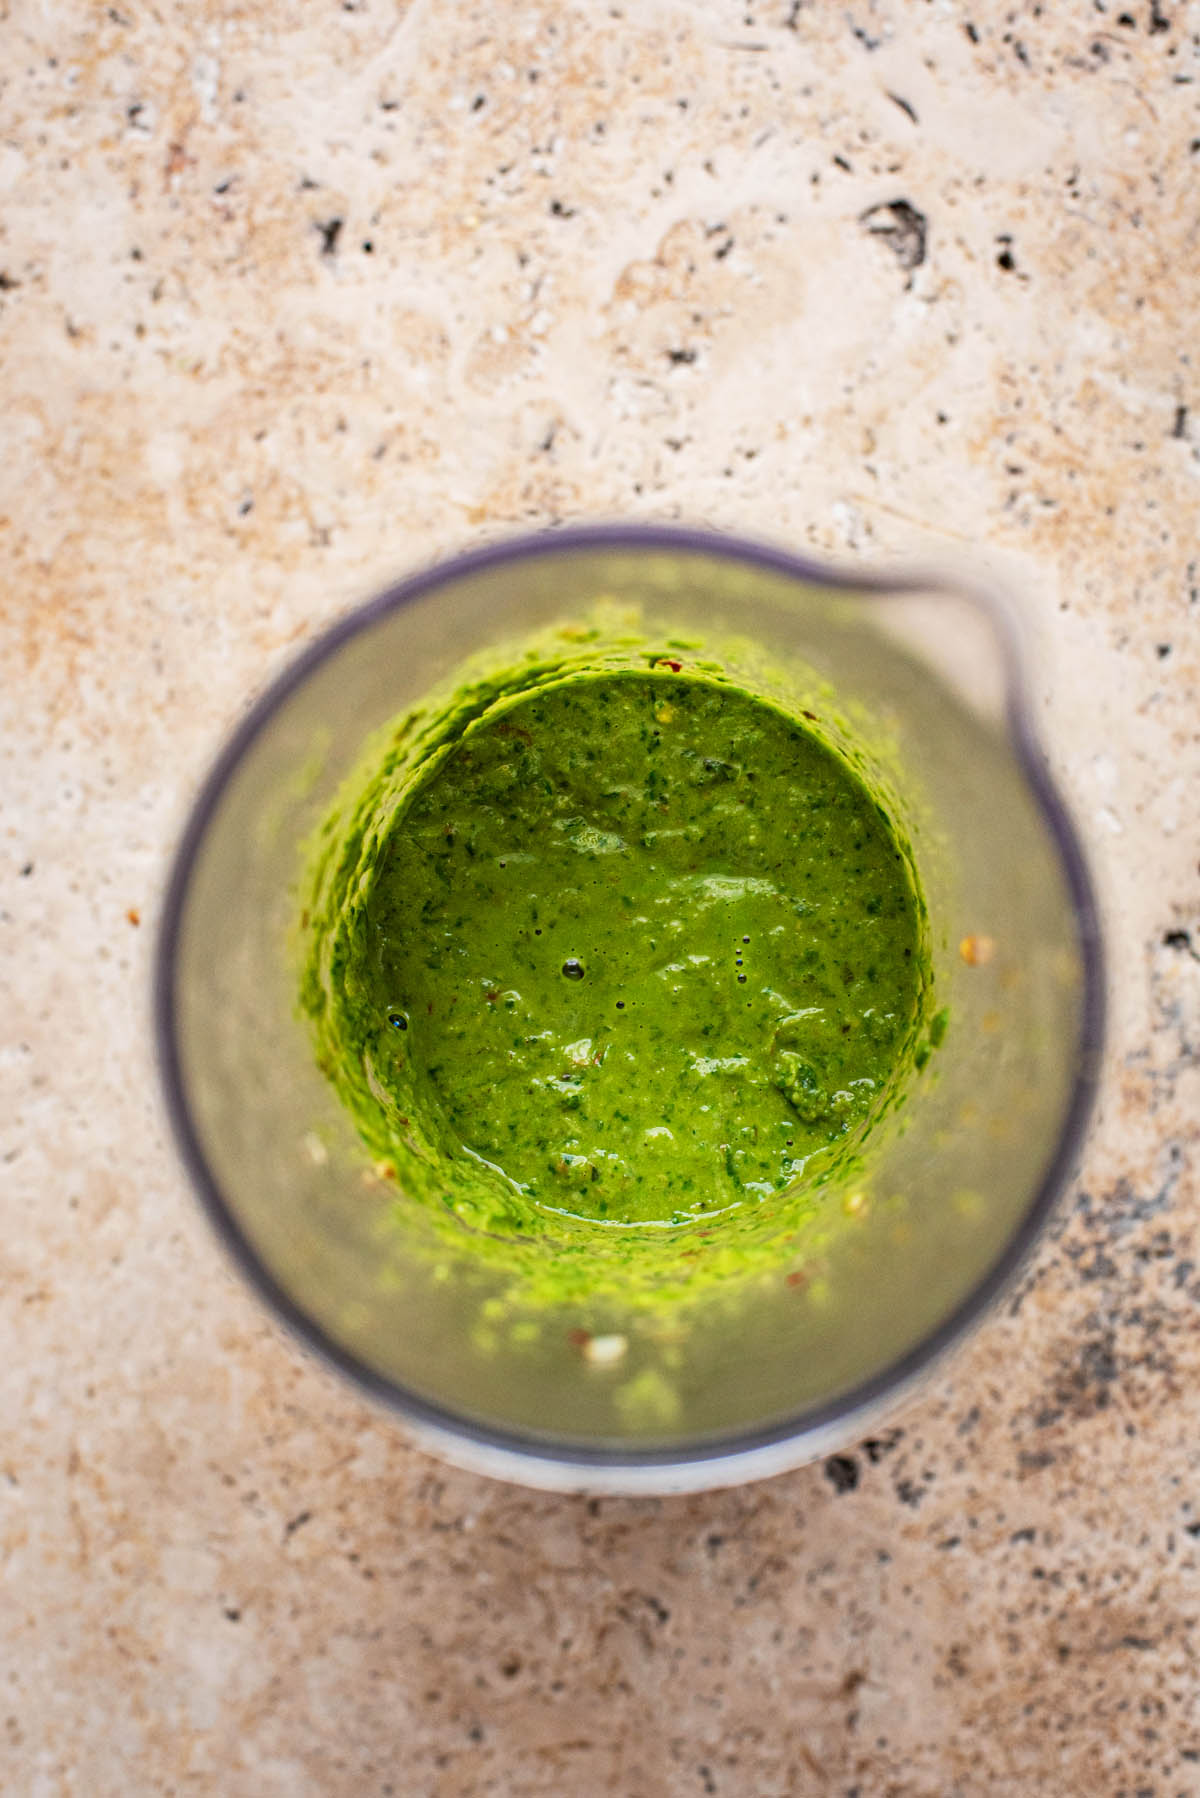 Green pasta sauce in a blending container.